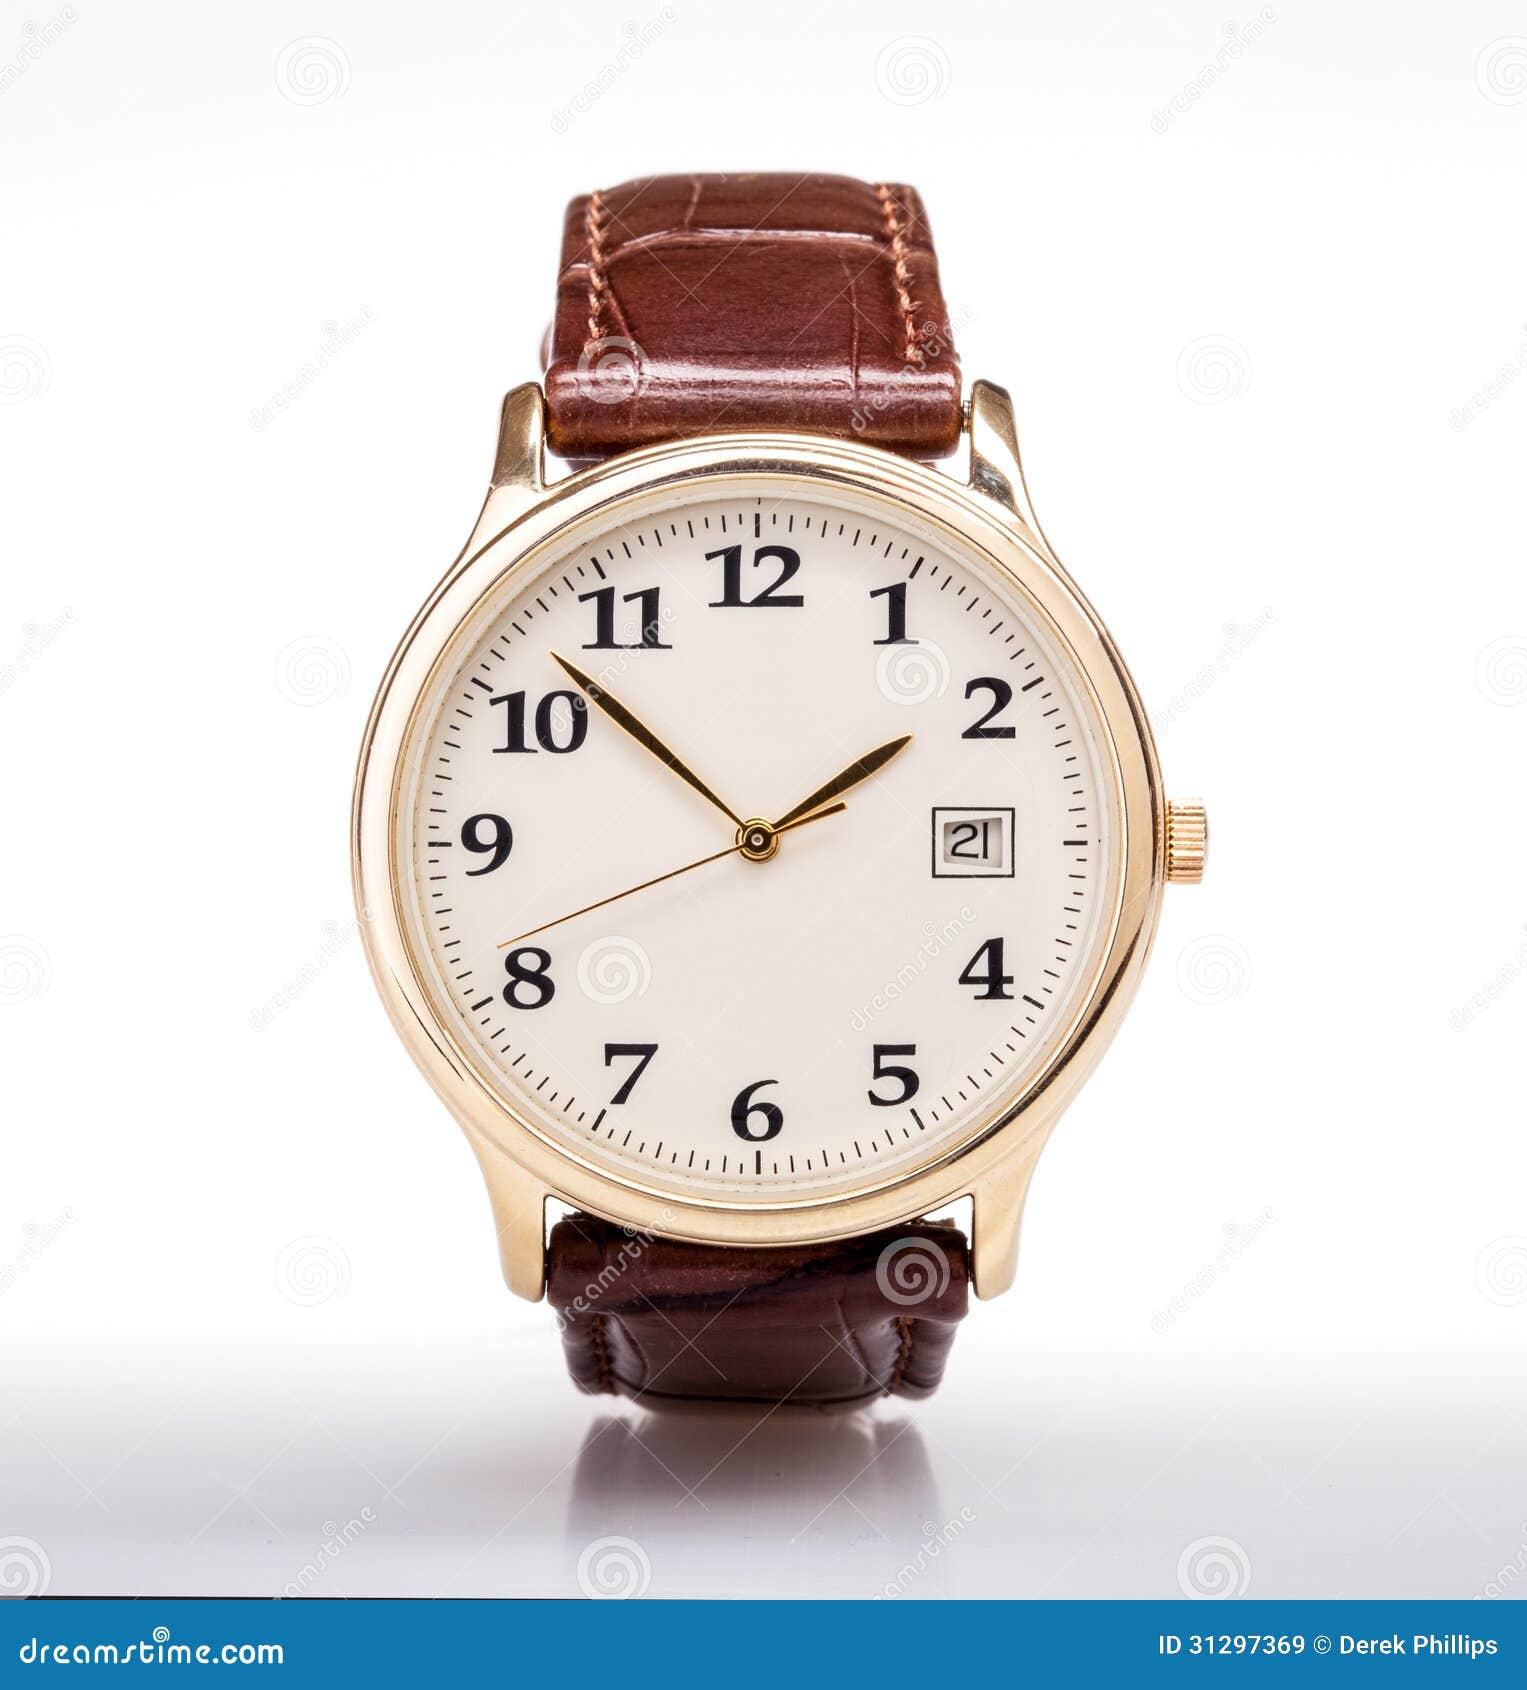 Gold Watch Leather Strap Royalty Free Stock Images - Image: 31297369